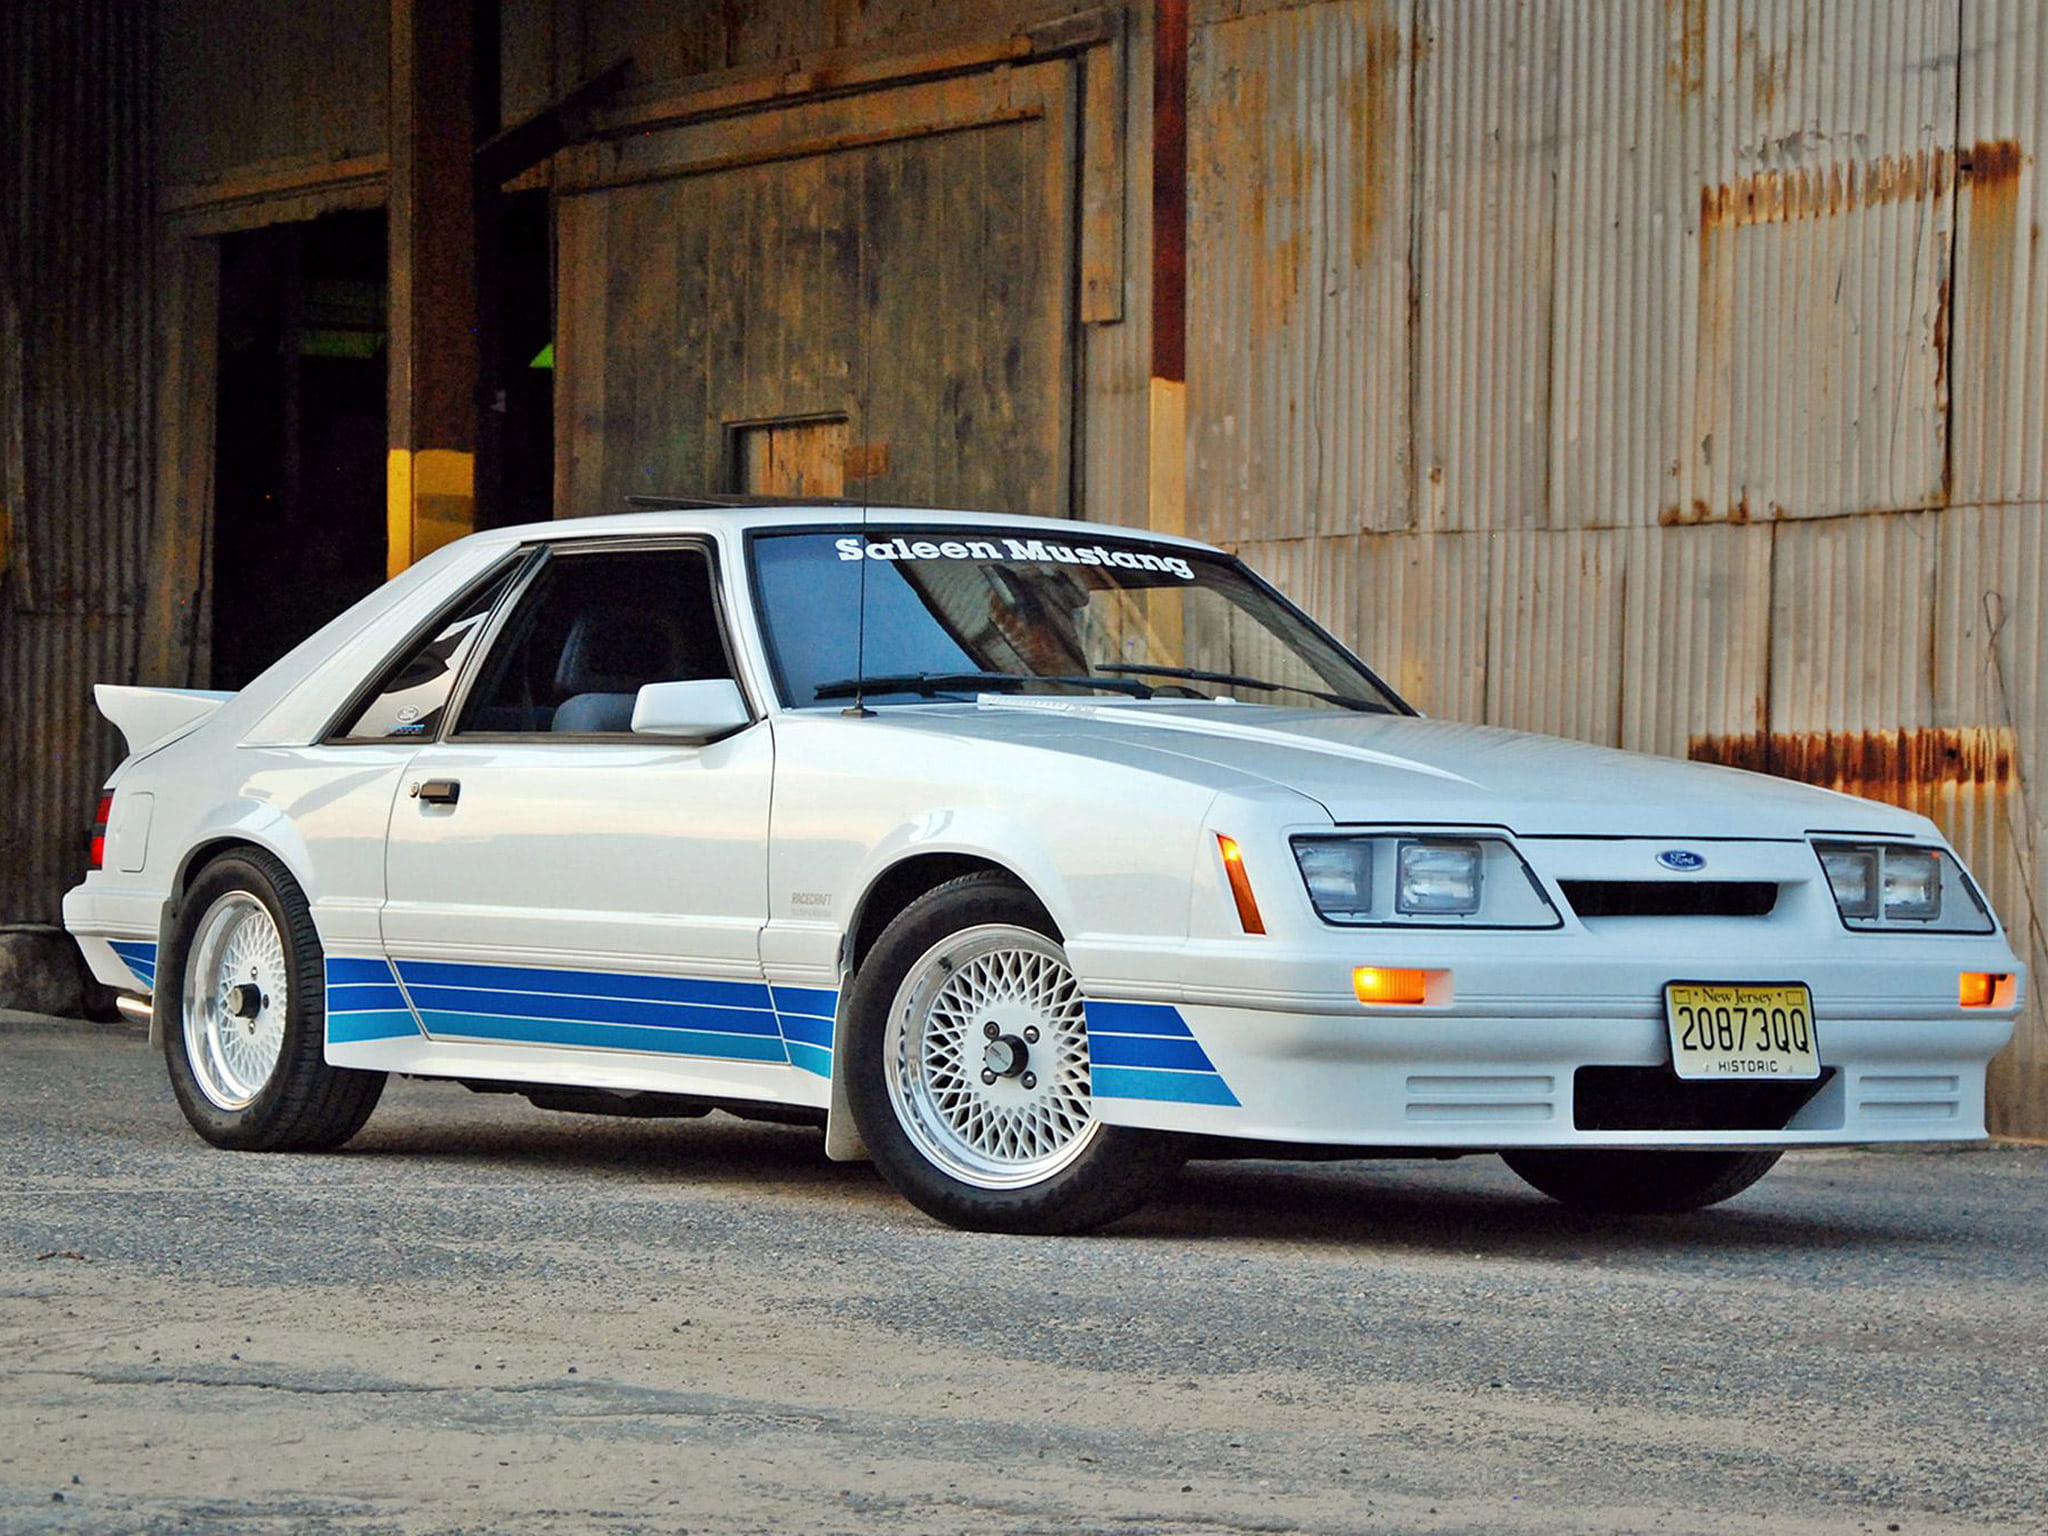 Mustang Of The Day: 1985 Saleen Mustang